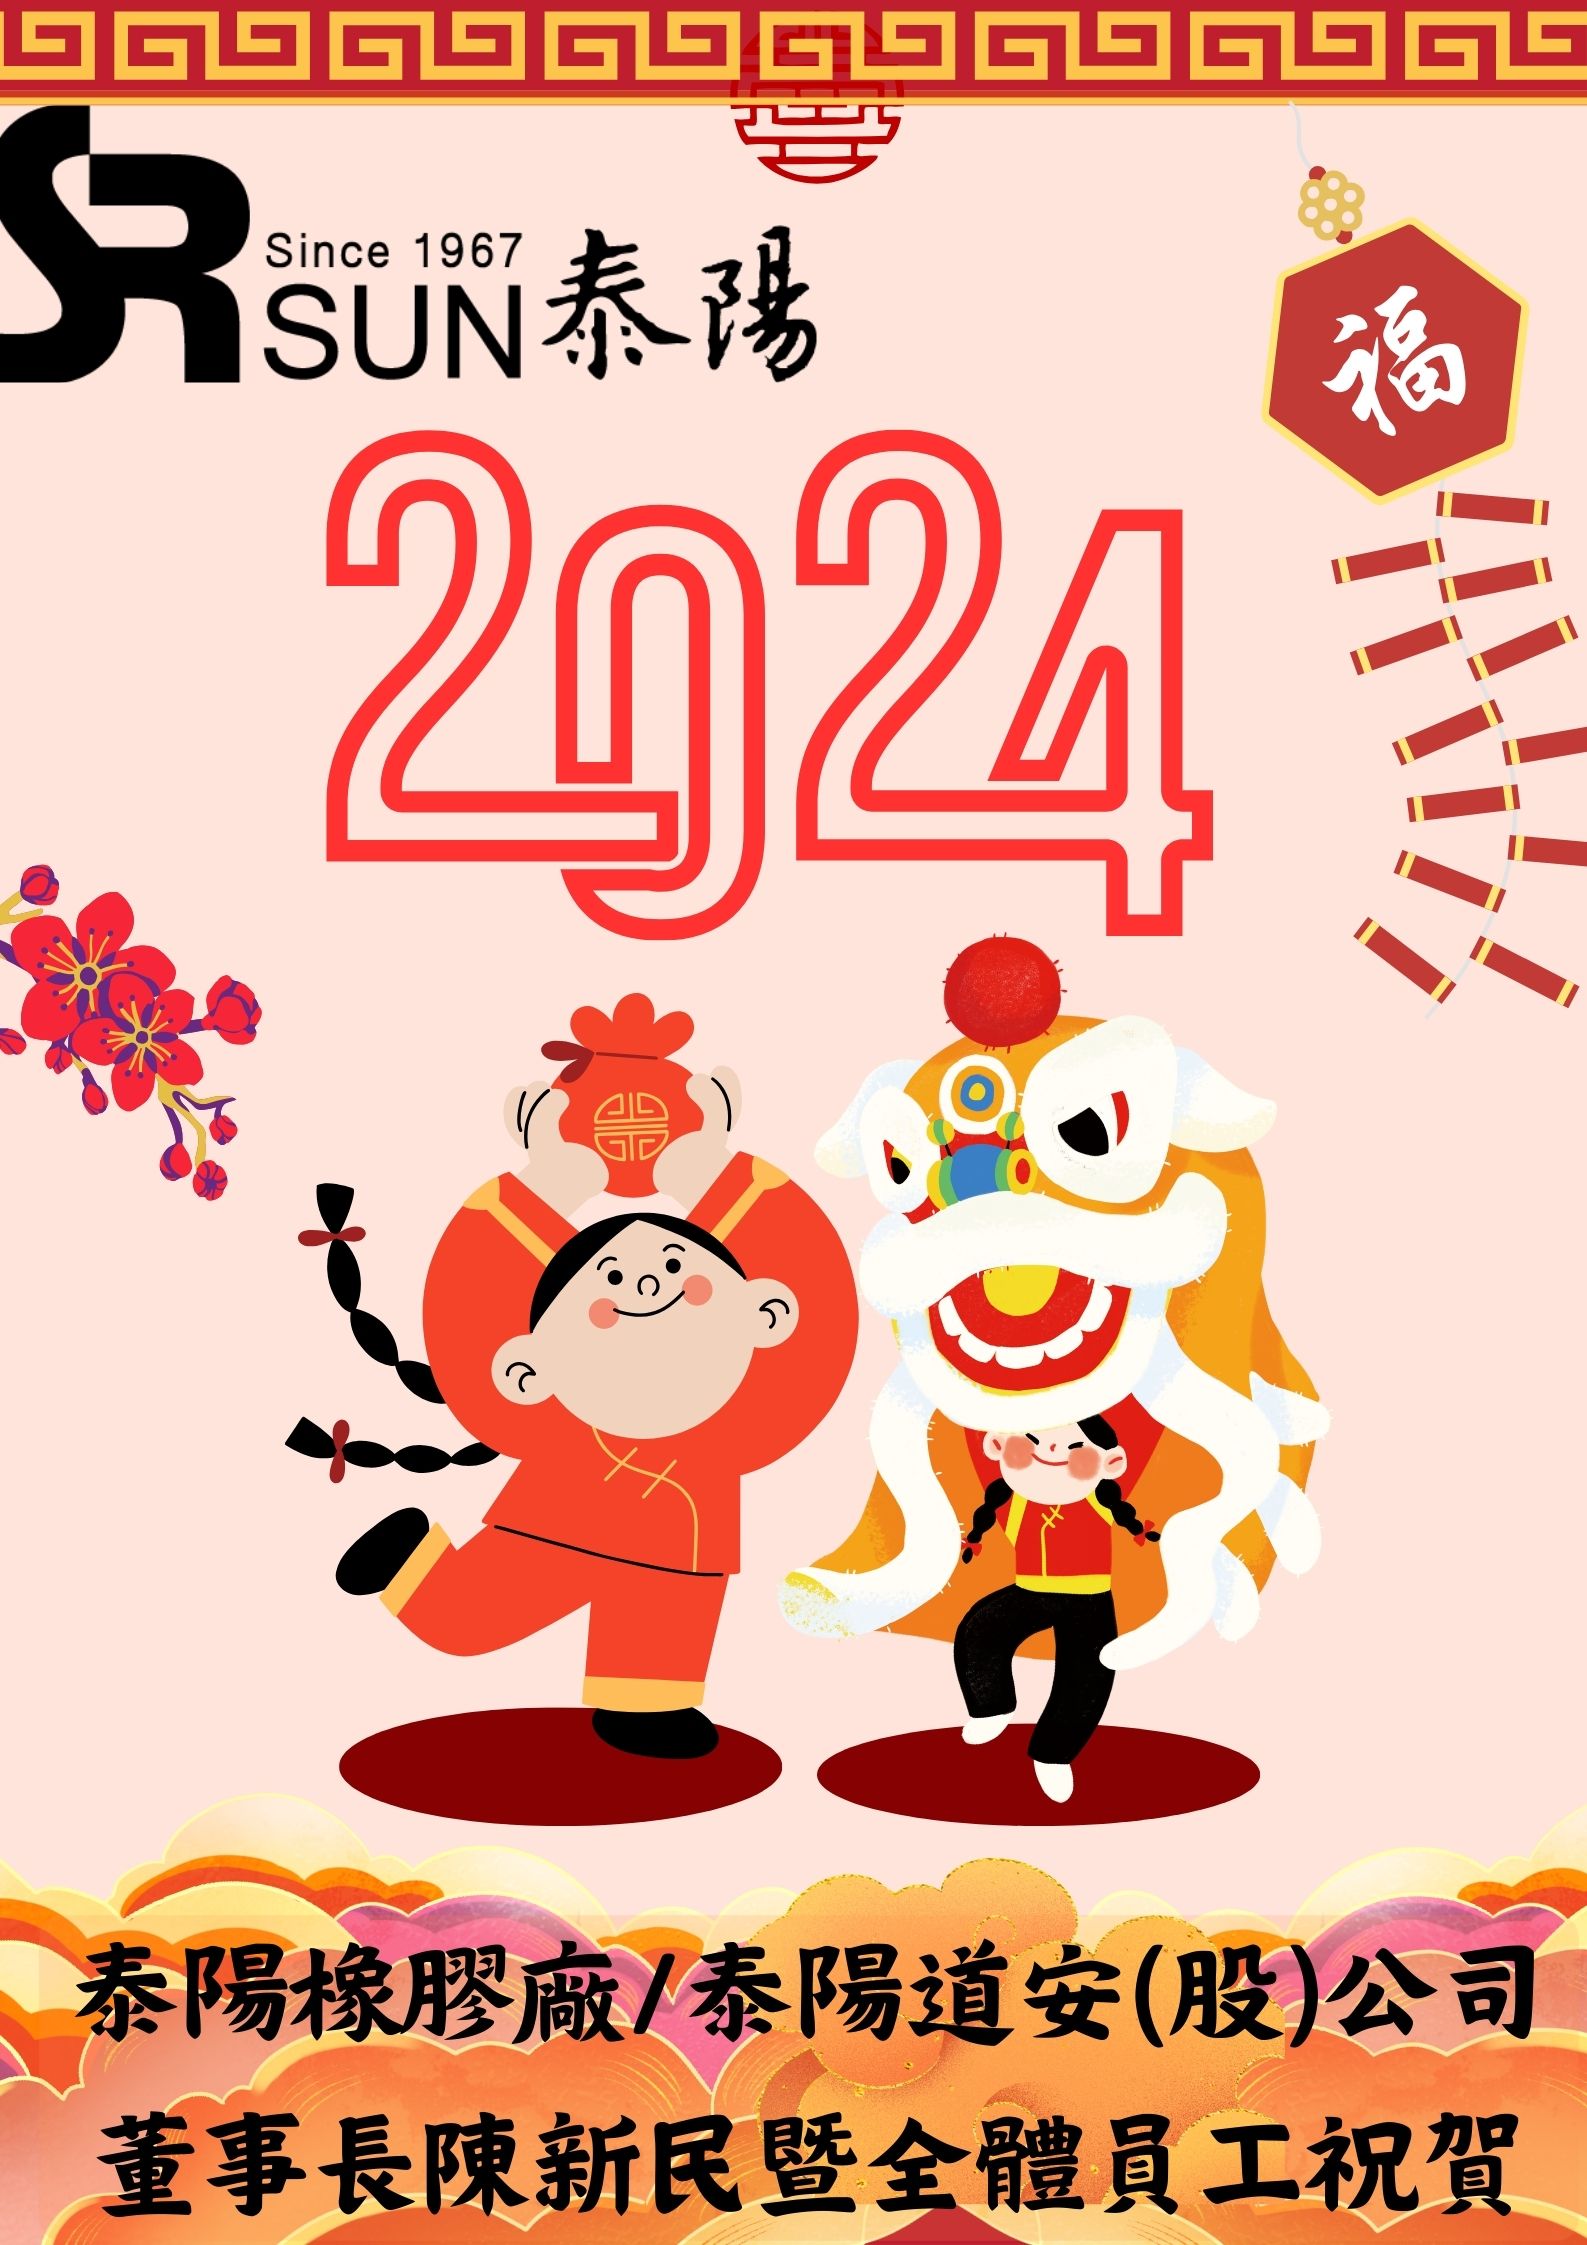 2024 Best wishes for your happiness in the Year of Dragon!